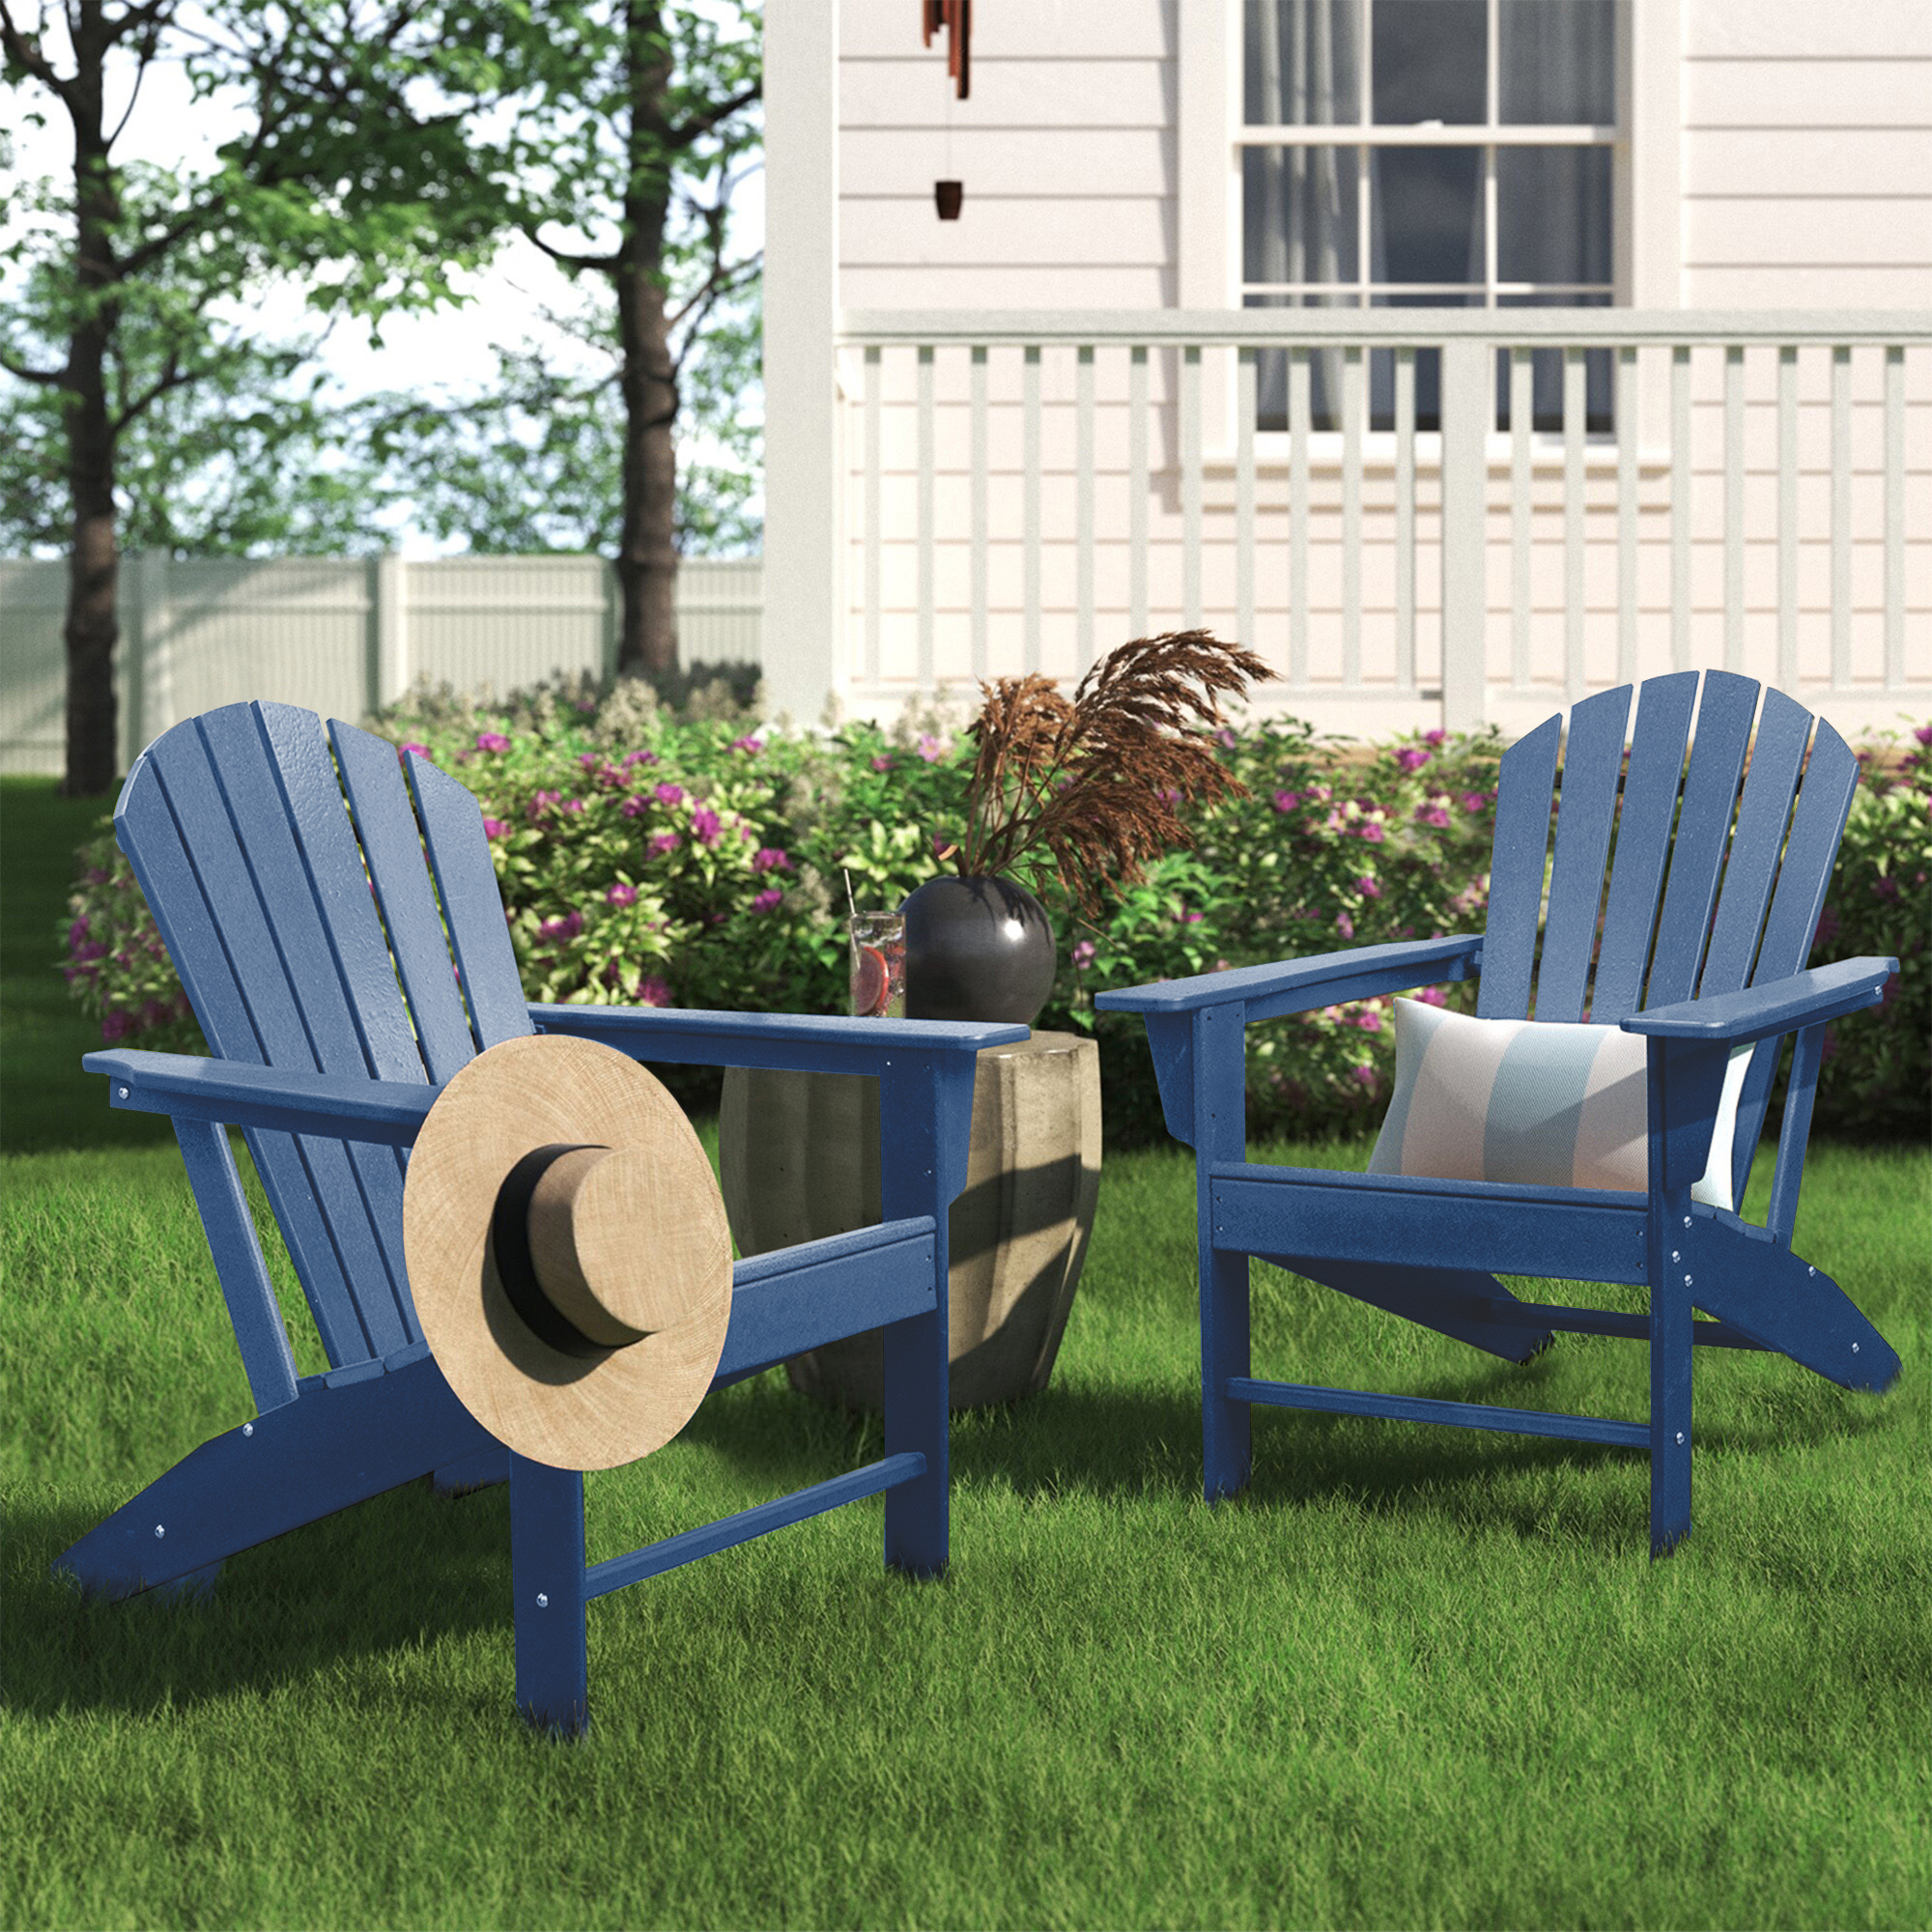 FHFO Outdoor Adirondack Chair,Weather Resistant Plastic Resin Chair for Outside Deck Garden Backyard Balcony(Navy Blue) - image 4 of 5